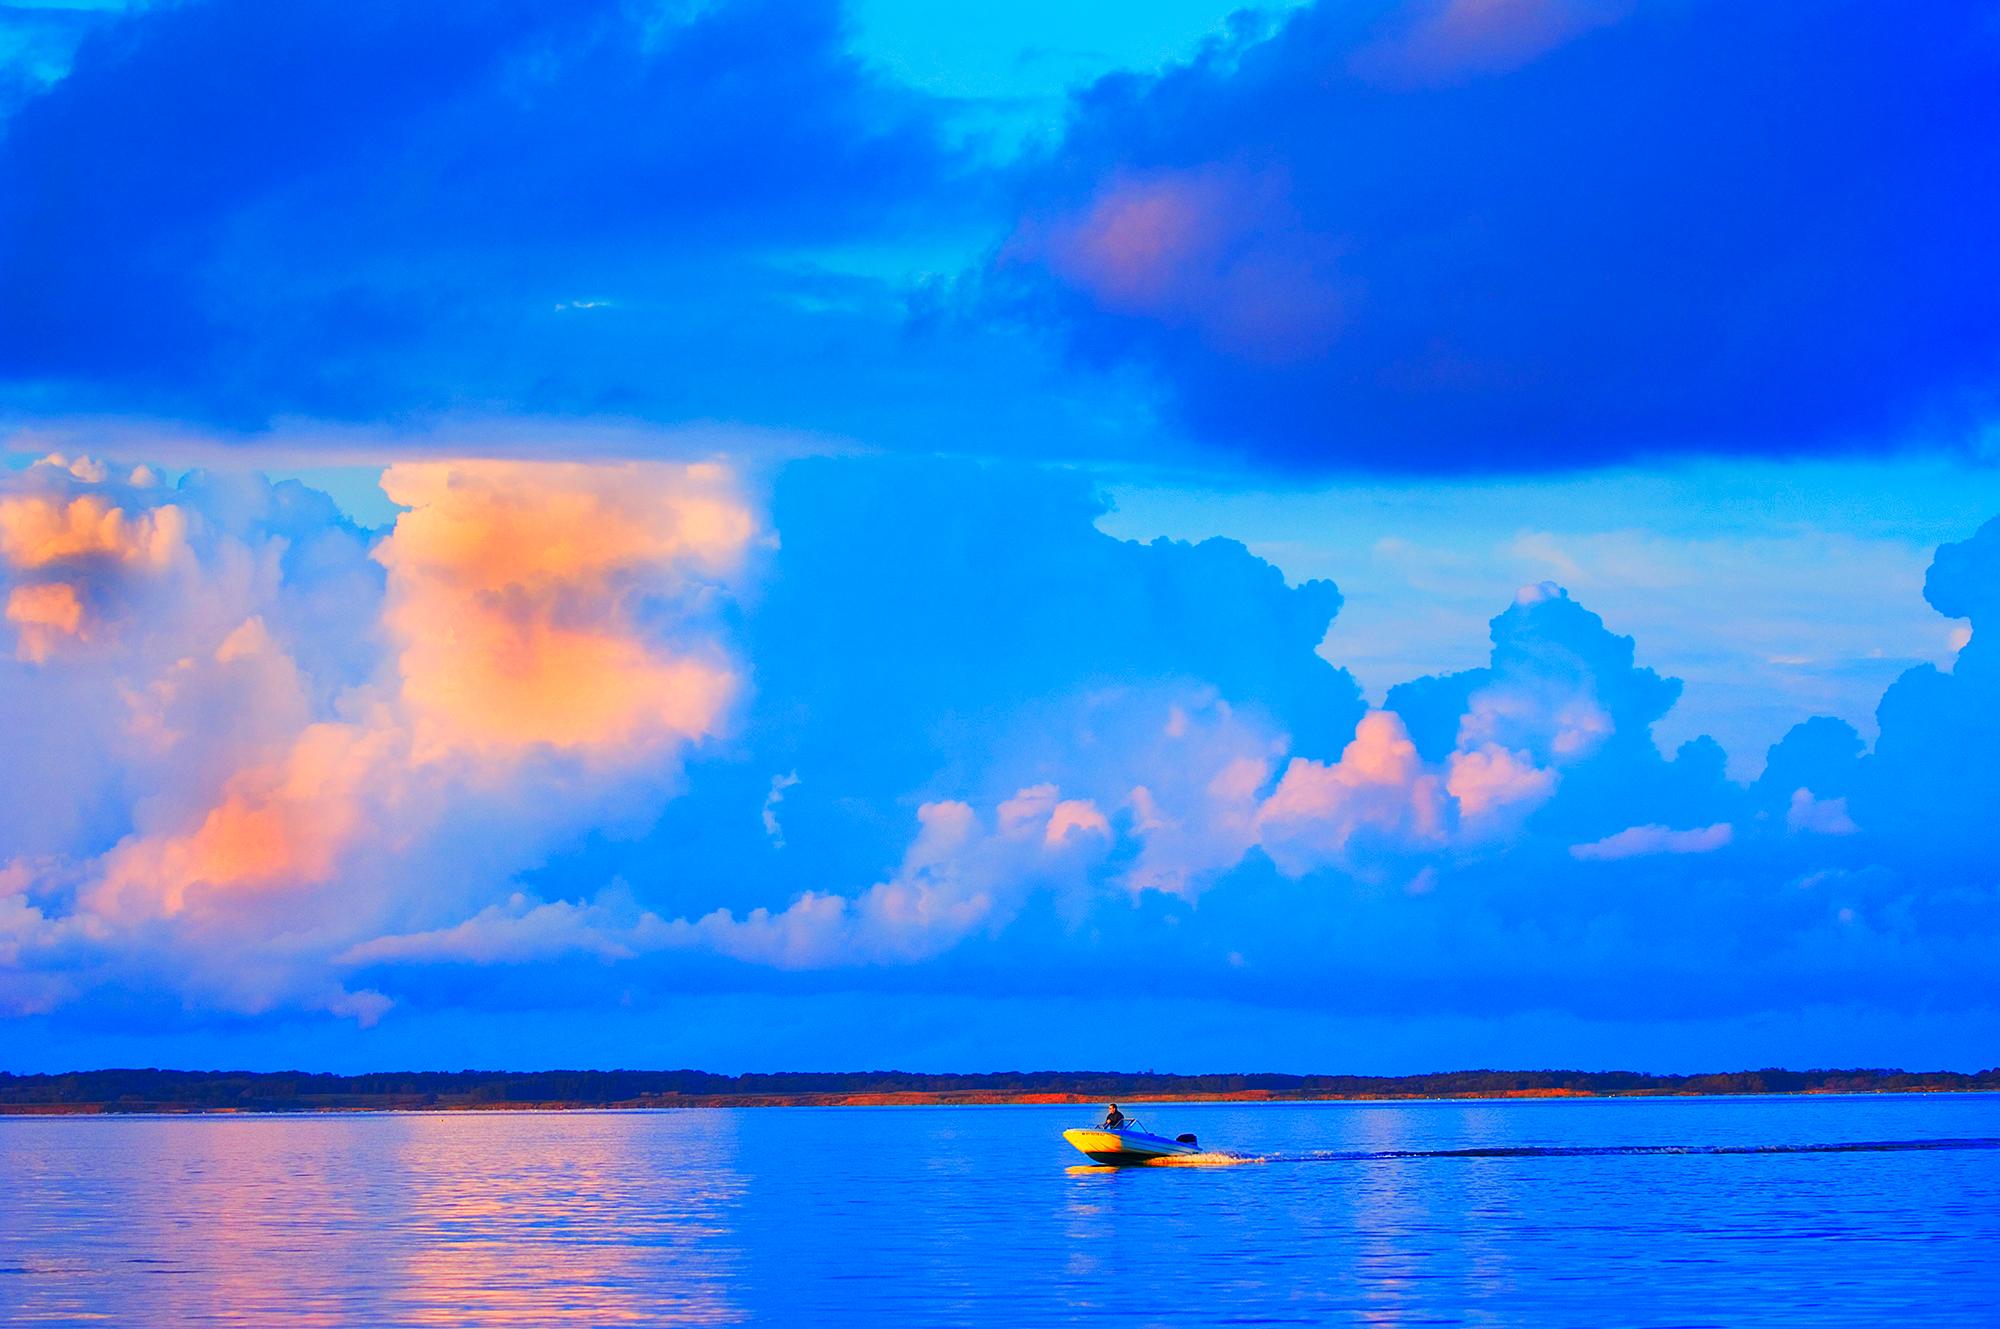 Mitchell Funk Color Photograph - Lone Boat On Gardiners Bay At Sunset, East Hampton - Cerulean Blue Sky